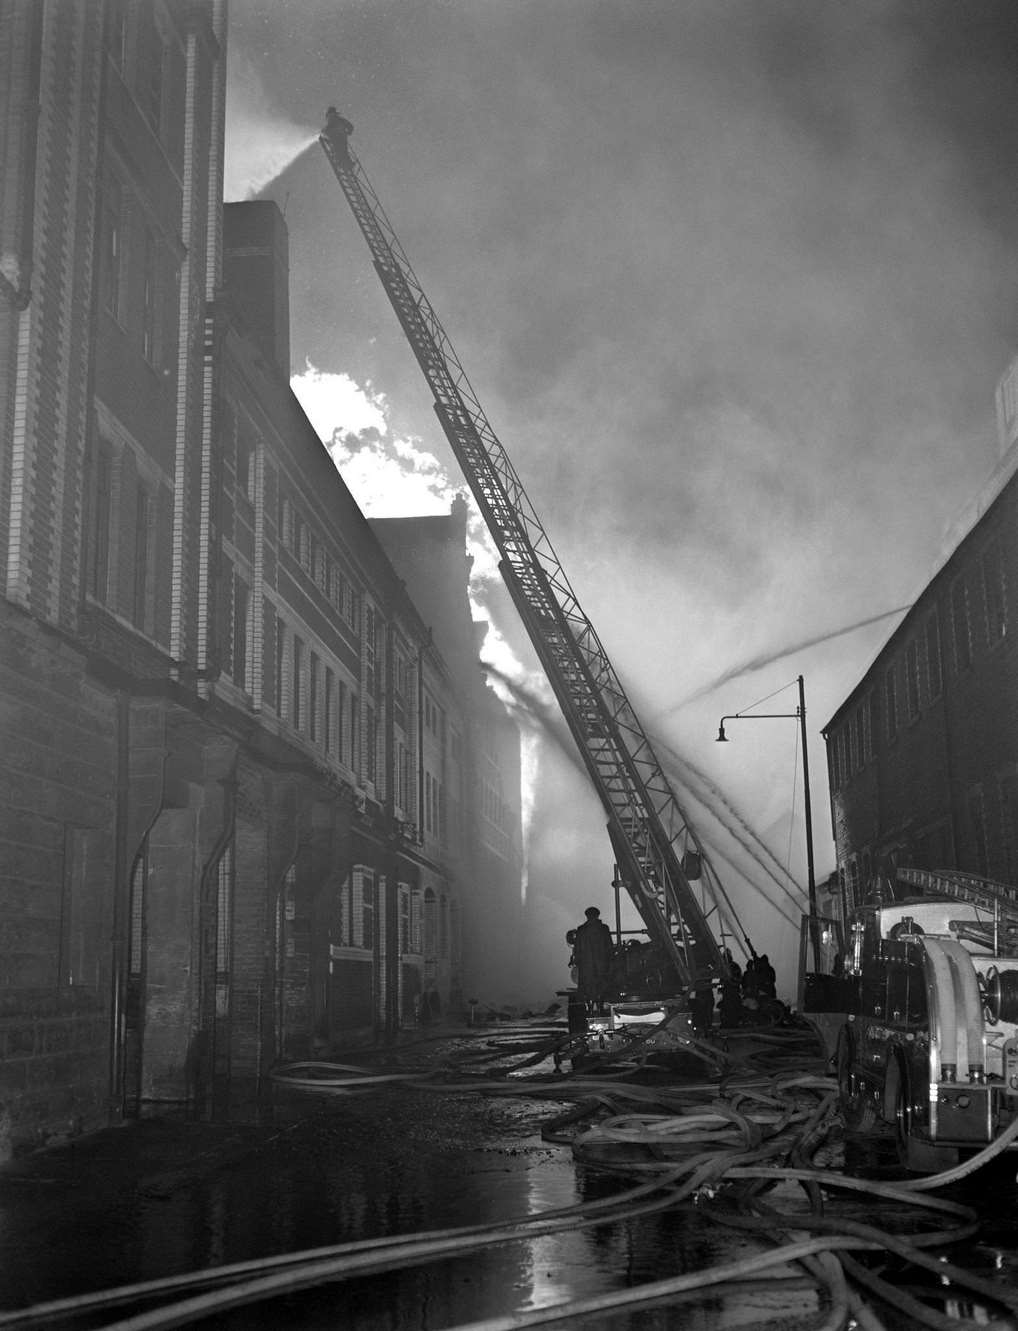 Disasters and Accidents - Cheapside Street Whisky Bond Fire,  Glasgow, 1960s